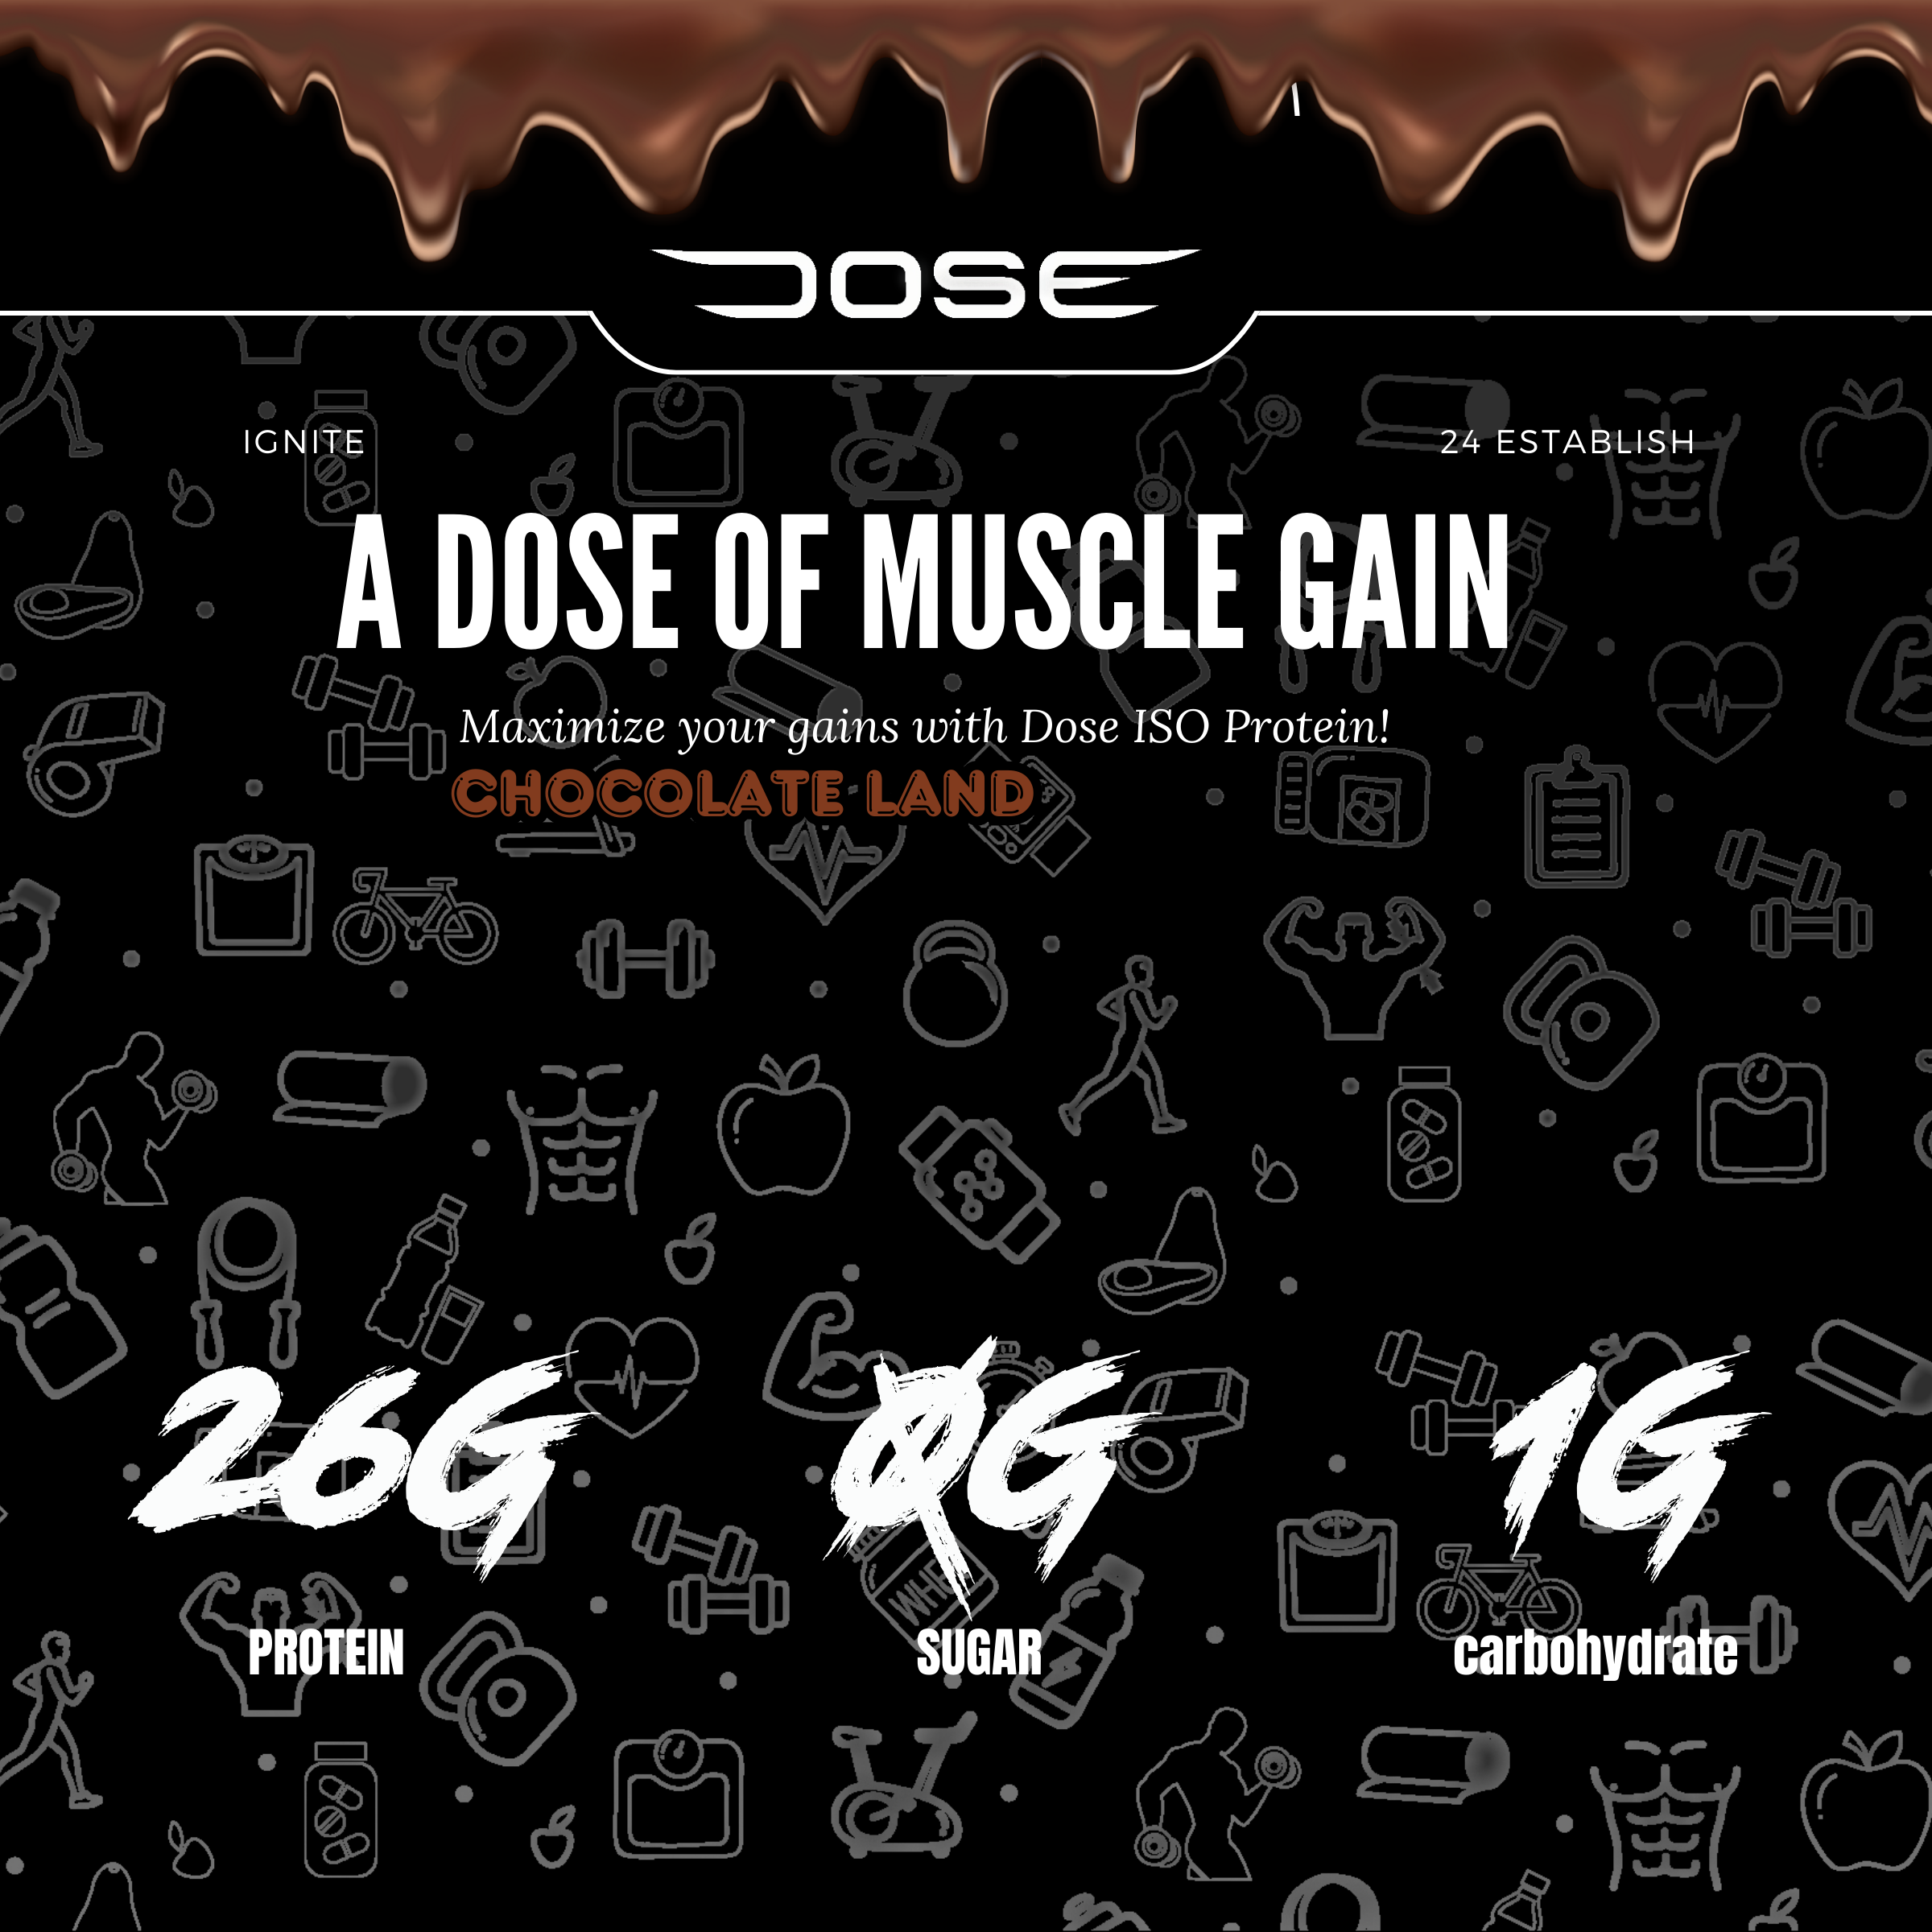 Dose Fuel Protein Supplement - Chocolate-Land Flavor, 25g Protein, 0g Sugar, 1g Carbohydrate, Maximize Your Gains with Dose ISO Protein